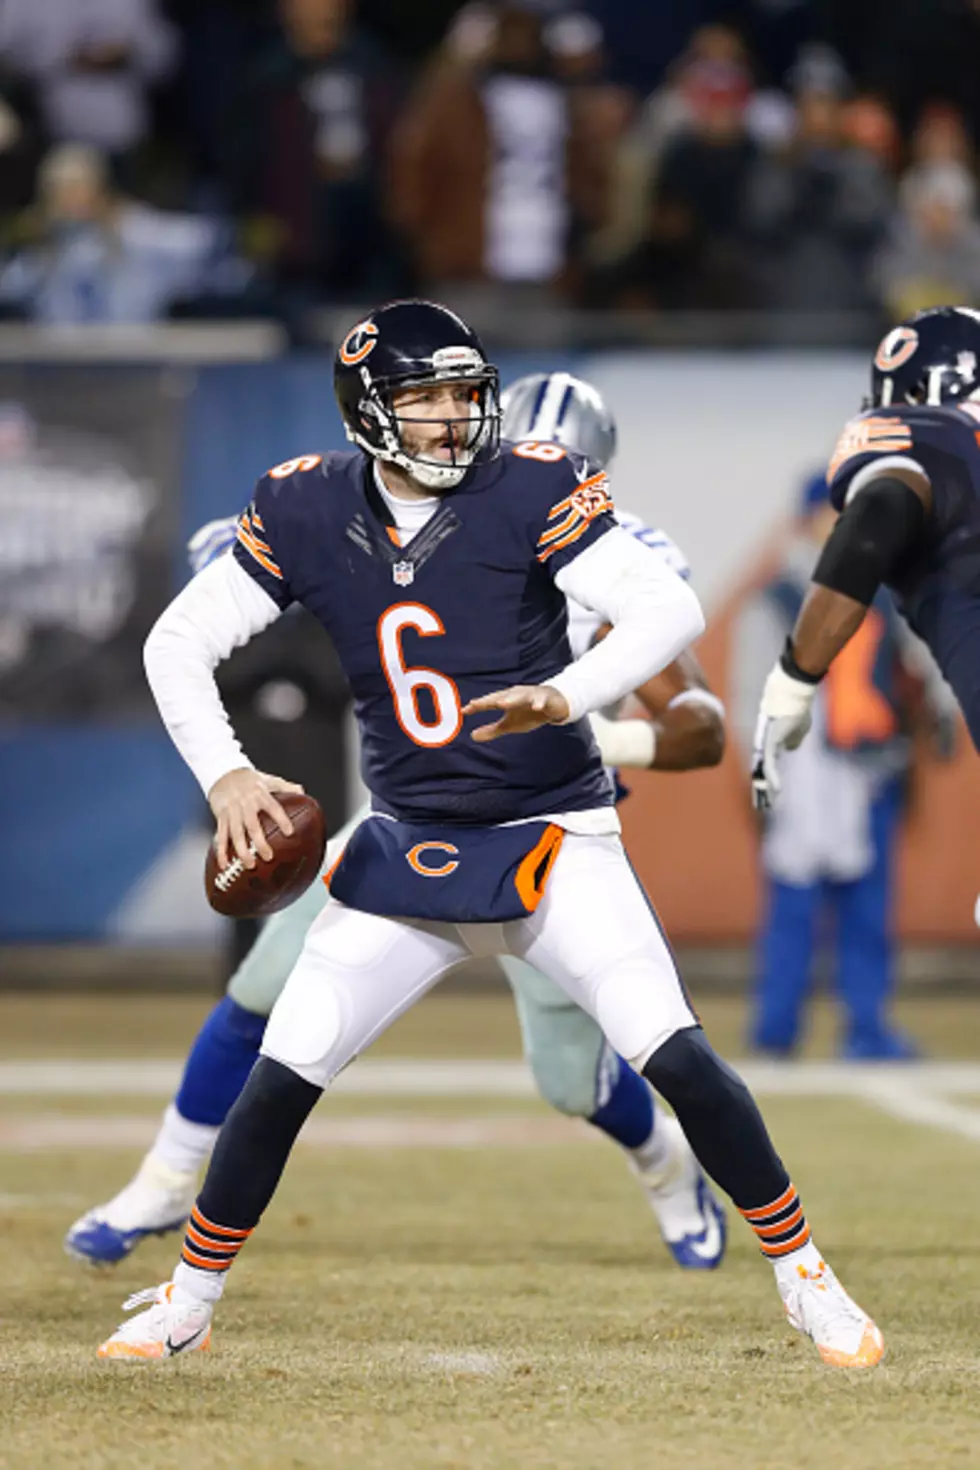 Bears Bench Cutler: Would You Want Him?